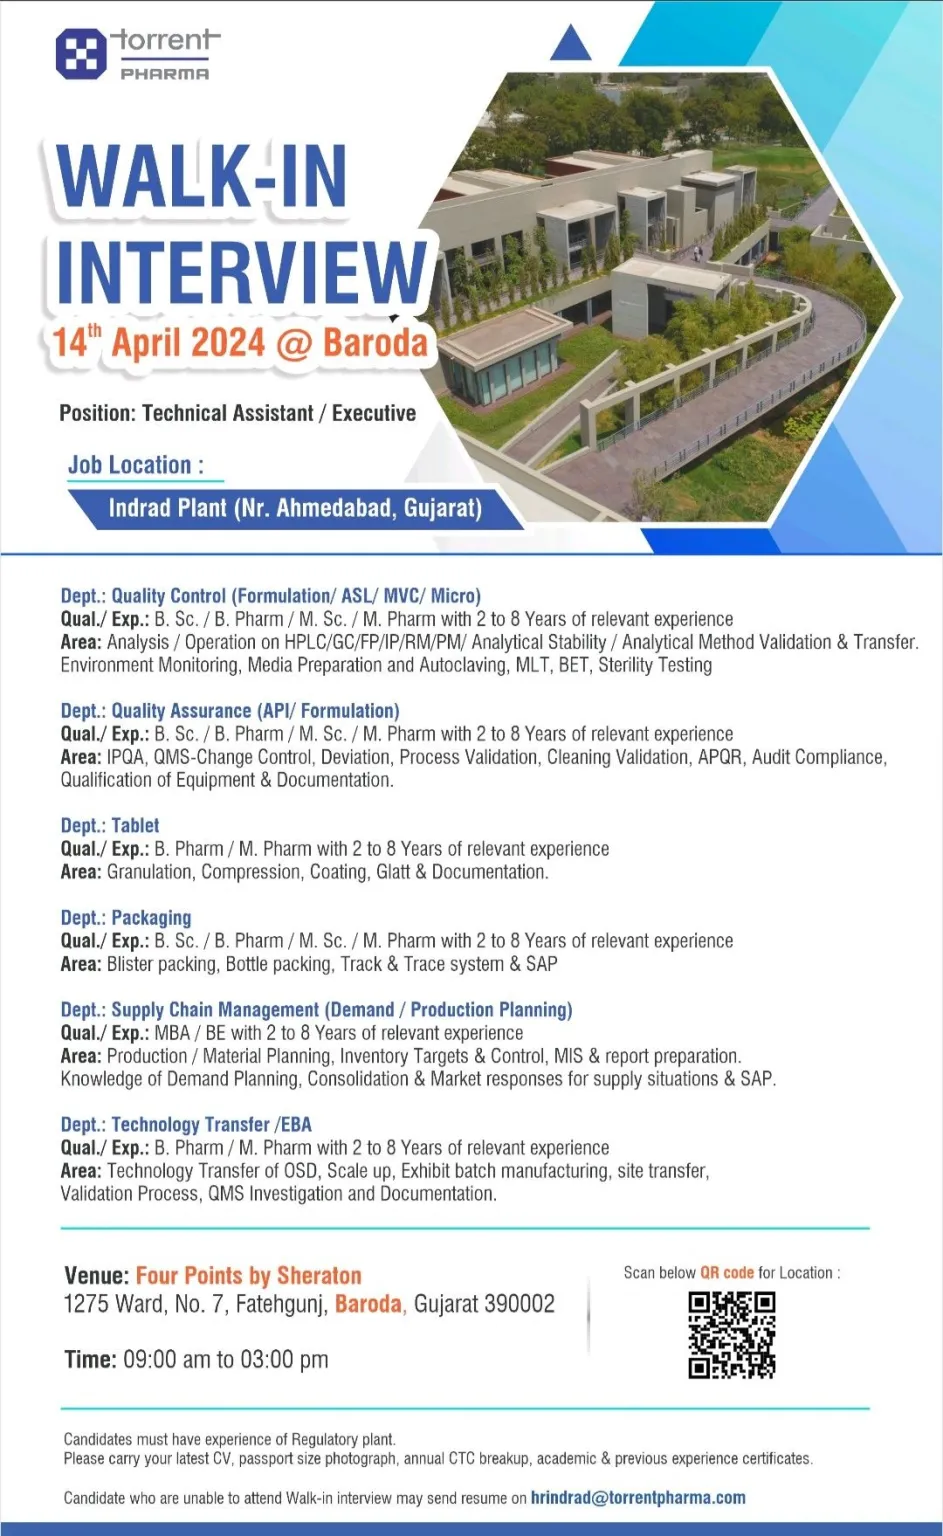 Torrent Pharmaceuticals Walk-In Interviews on 14th April 2024